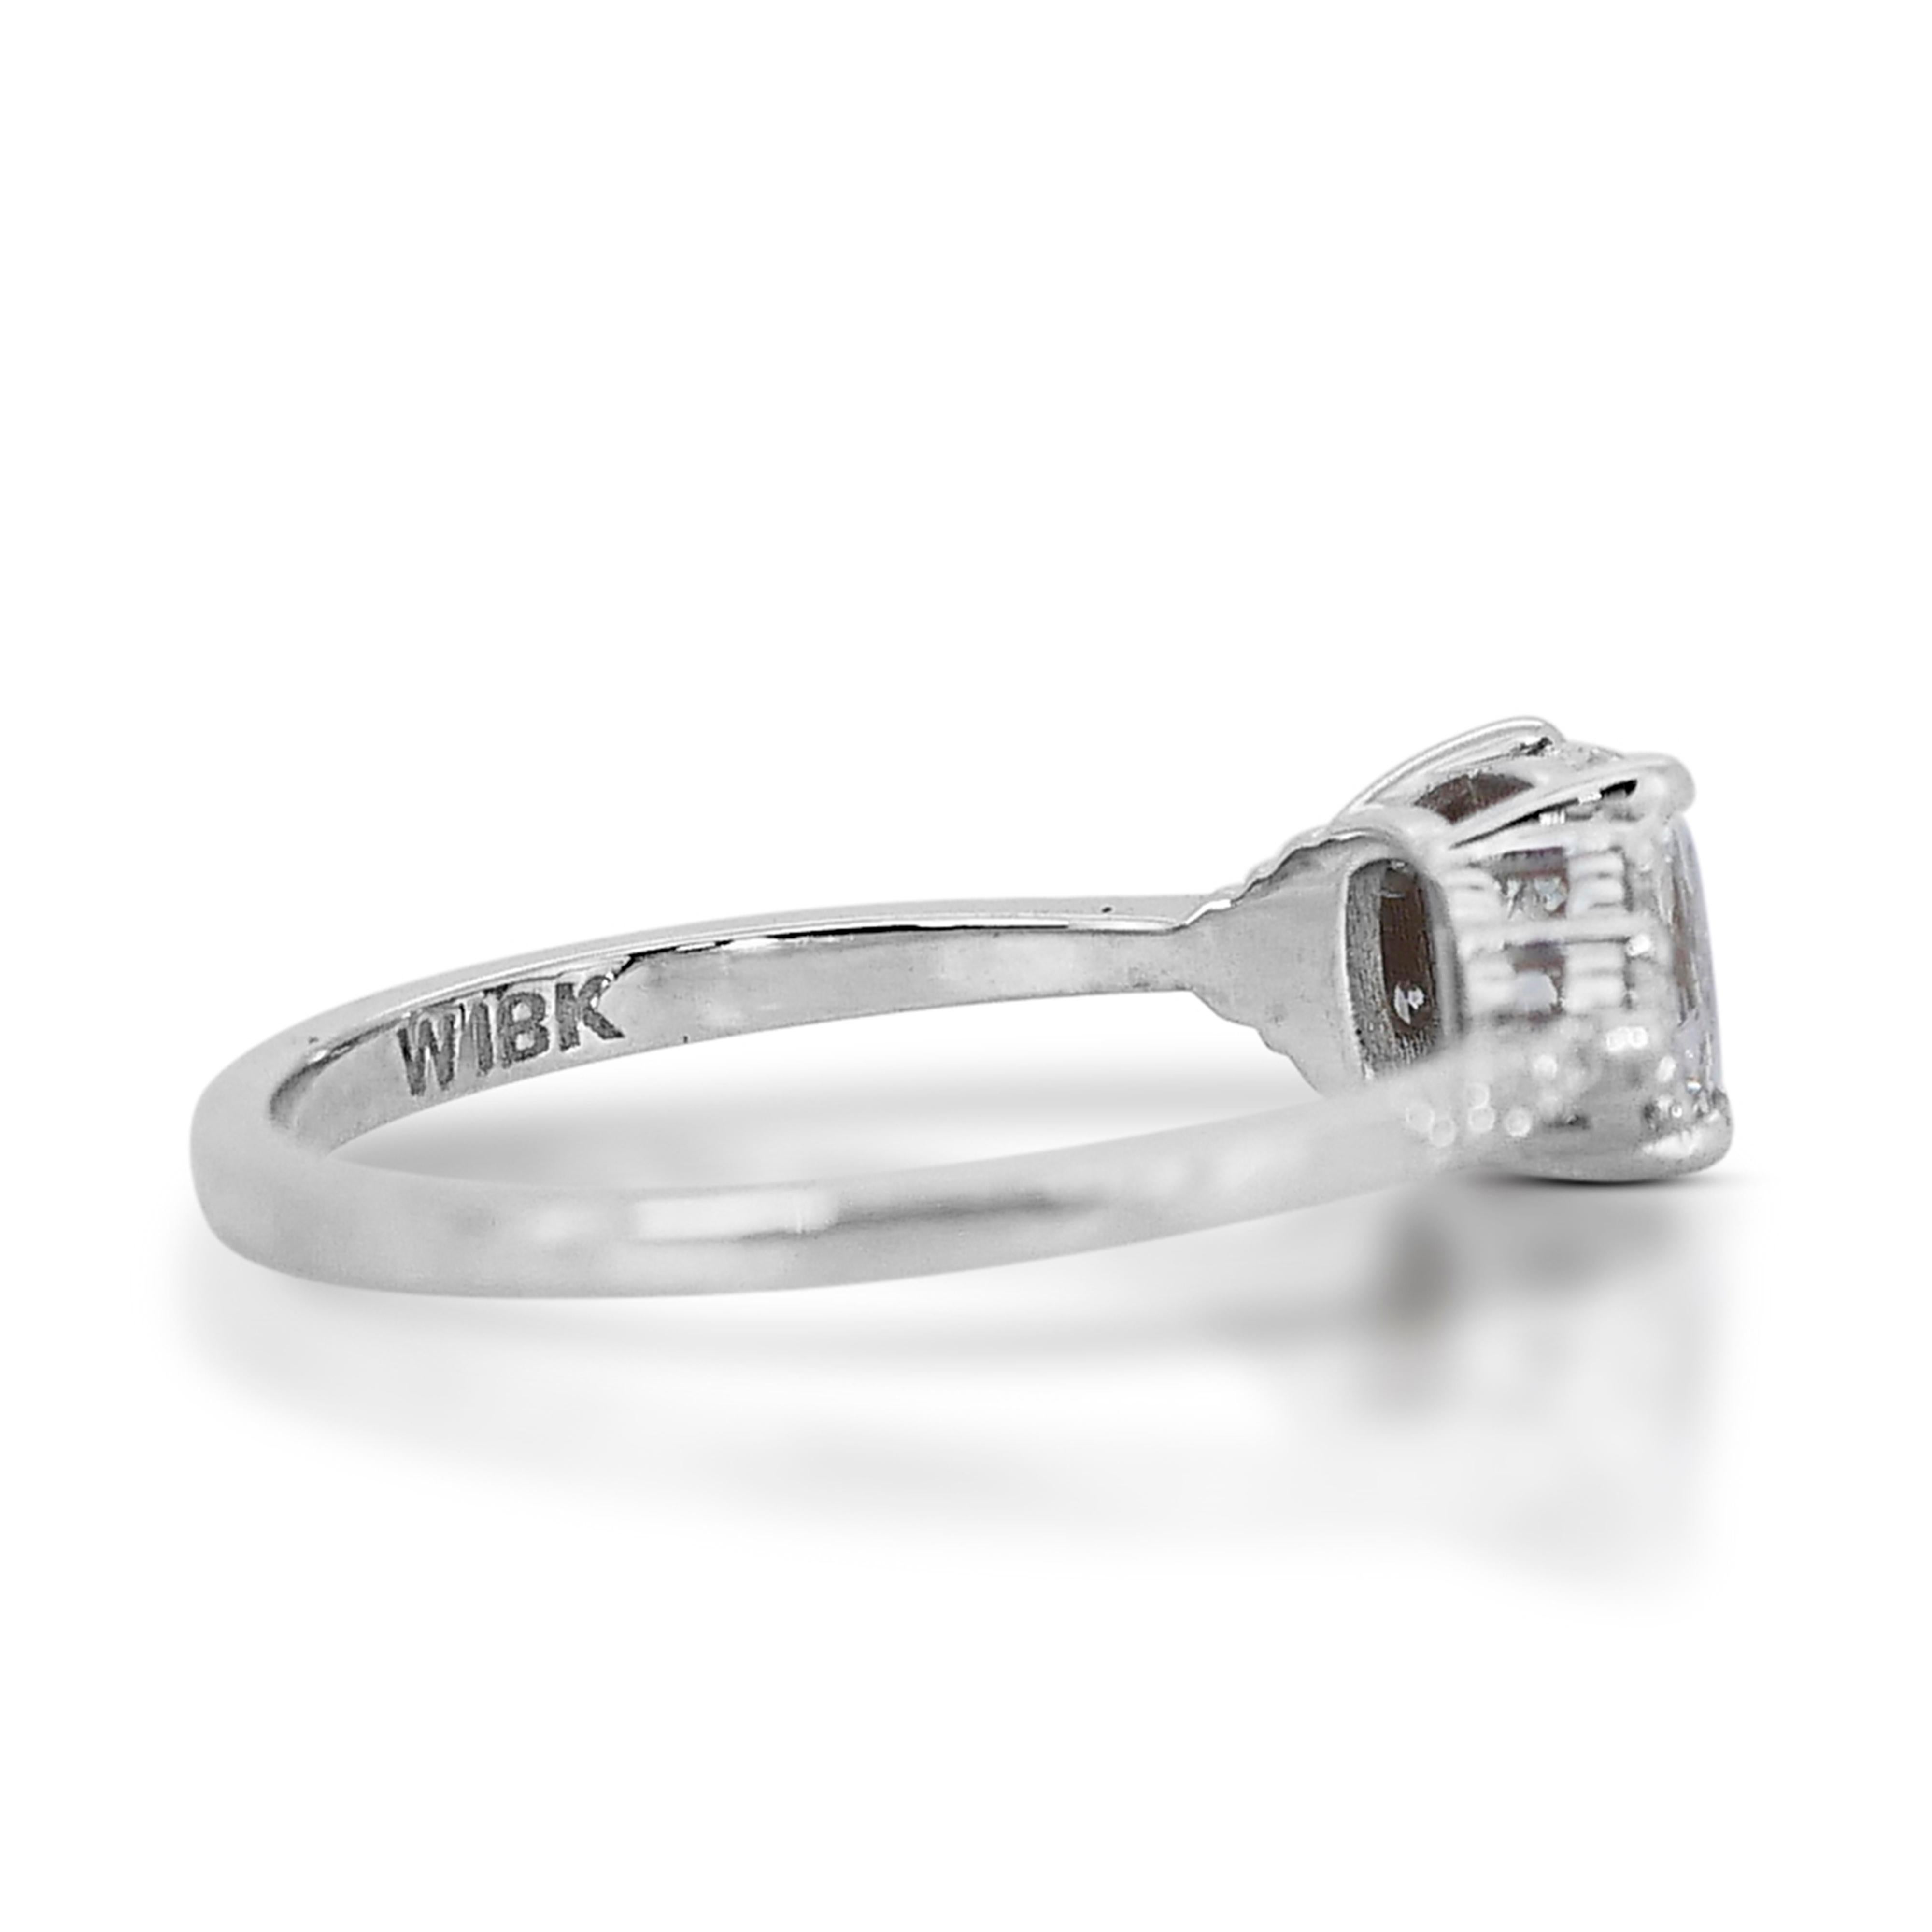 Stunning 18K White Gold Ideal Cut 3 Stone Natural Diamond Ring w/1.73ct-IGI CERT In New Condition For Sale In רמת גן, IL